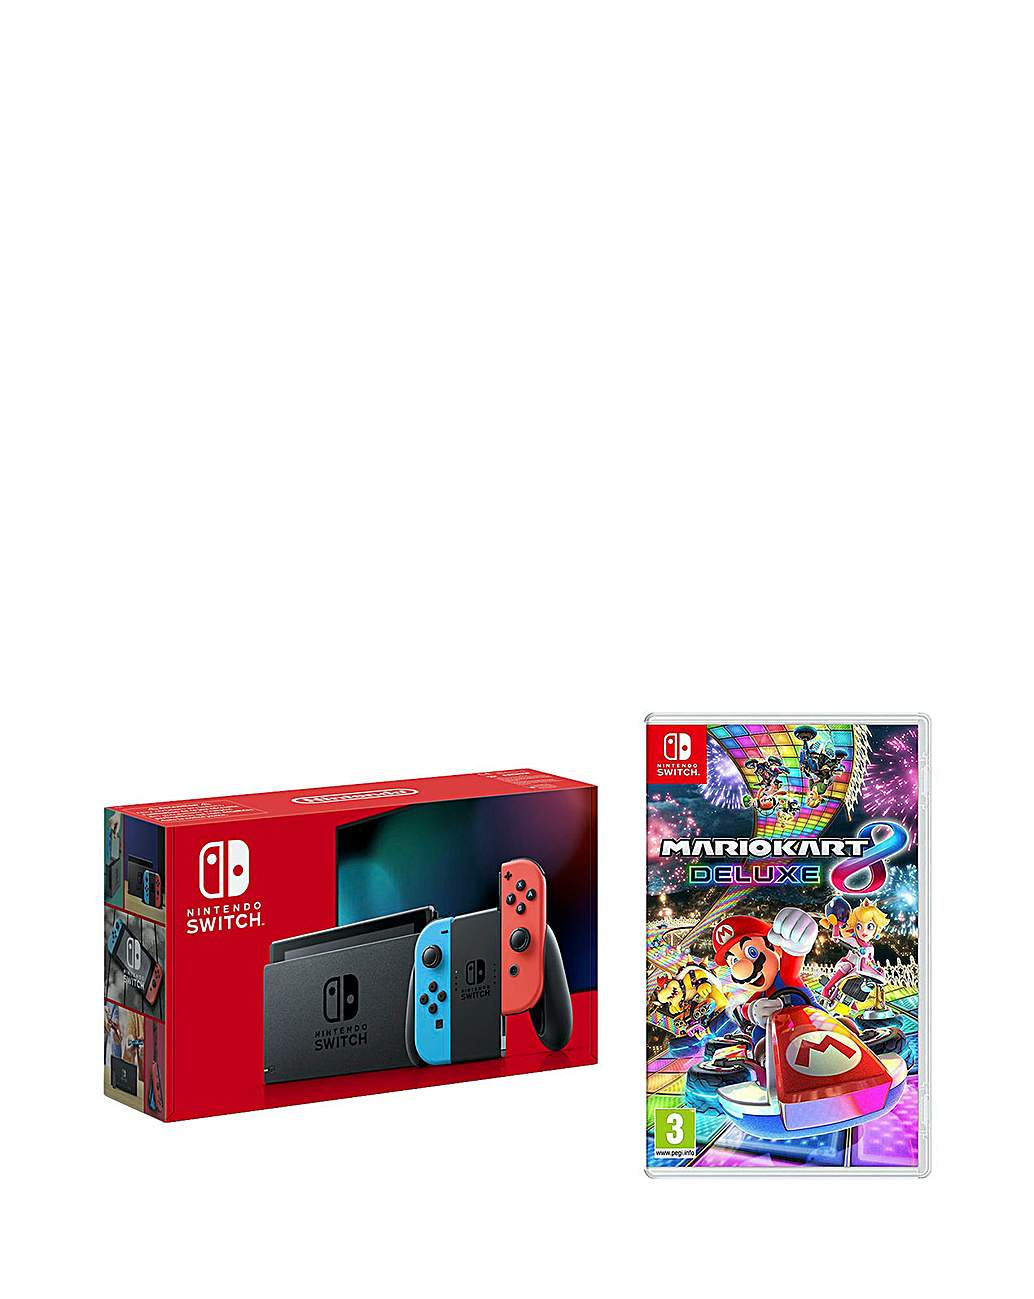 Nintendo Switch in Neon with Mario Kart and Accessories 975115638M